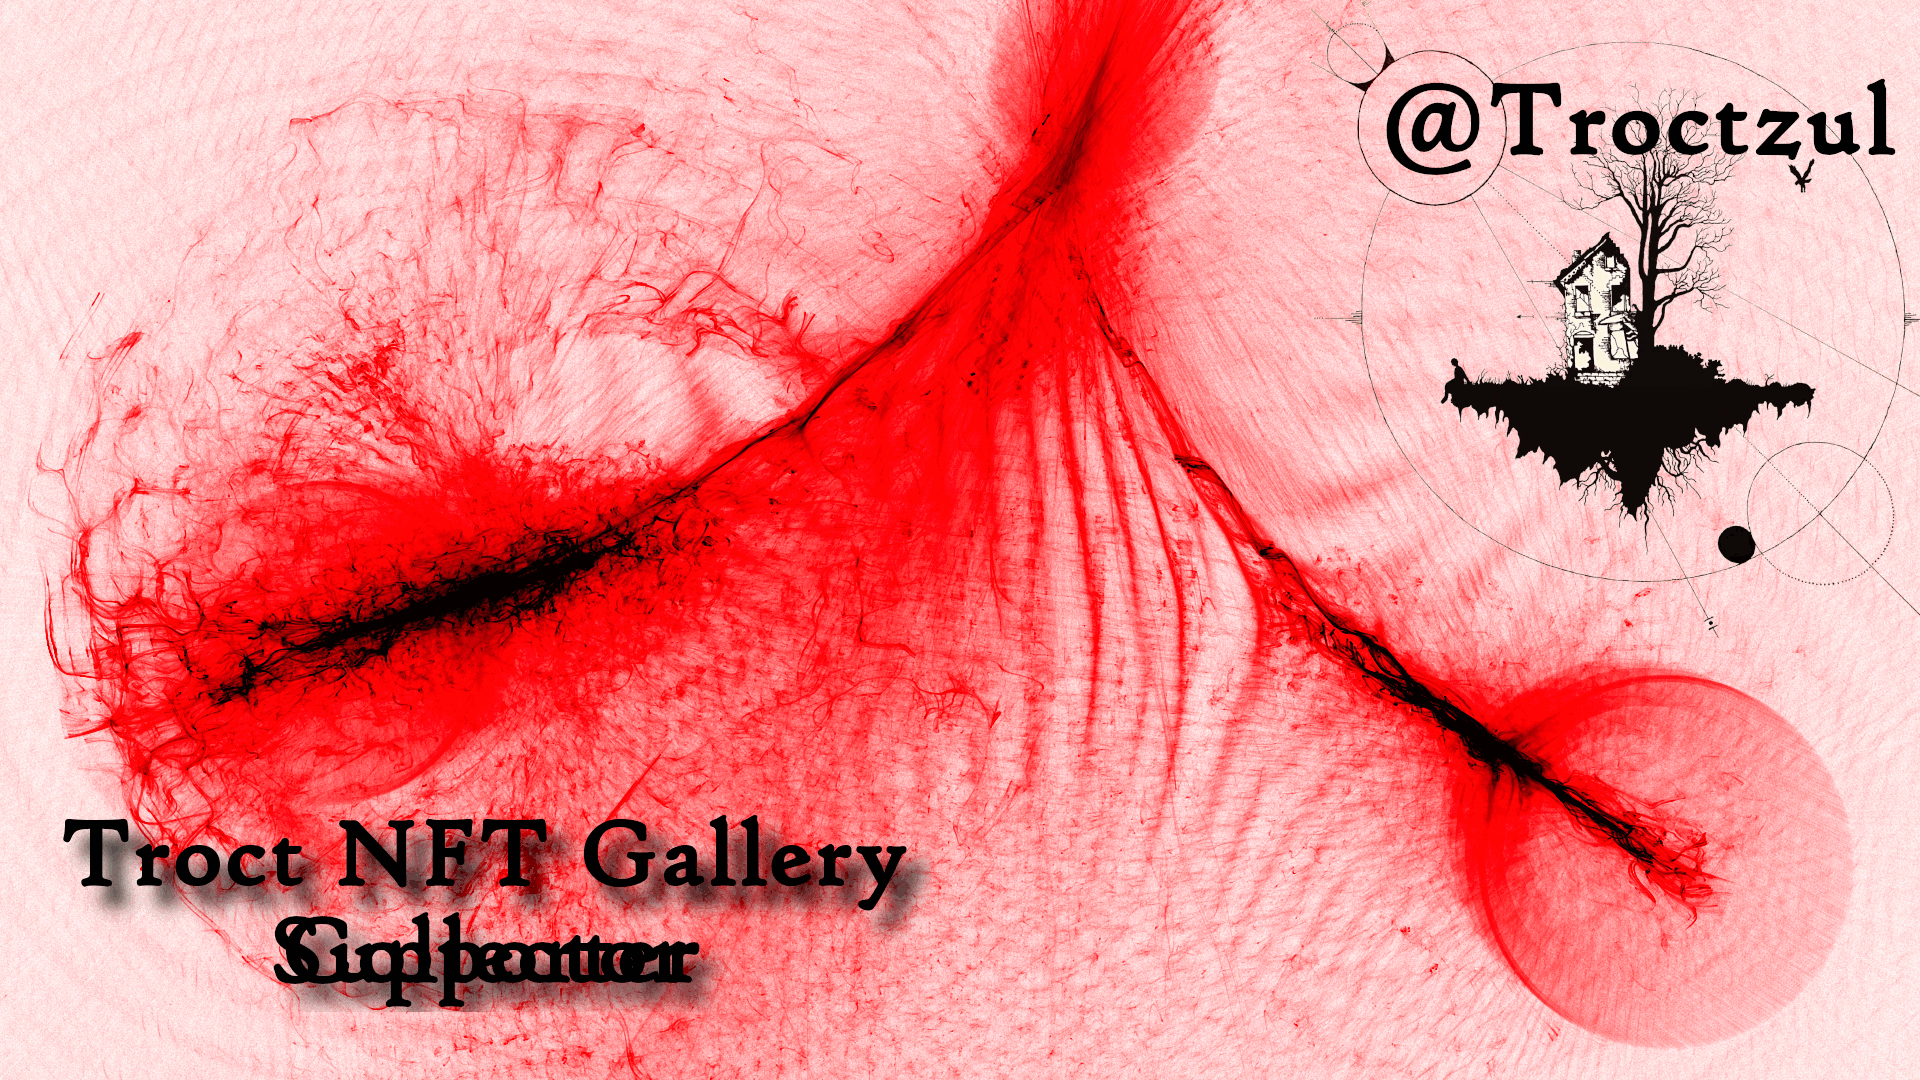 Troct NFT Gallery Collector Card